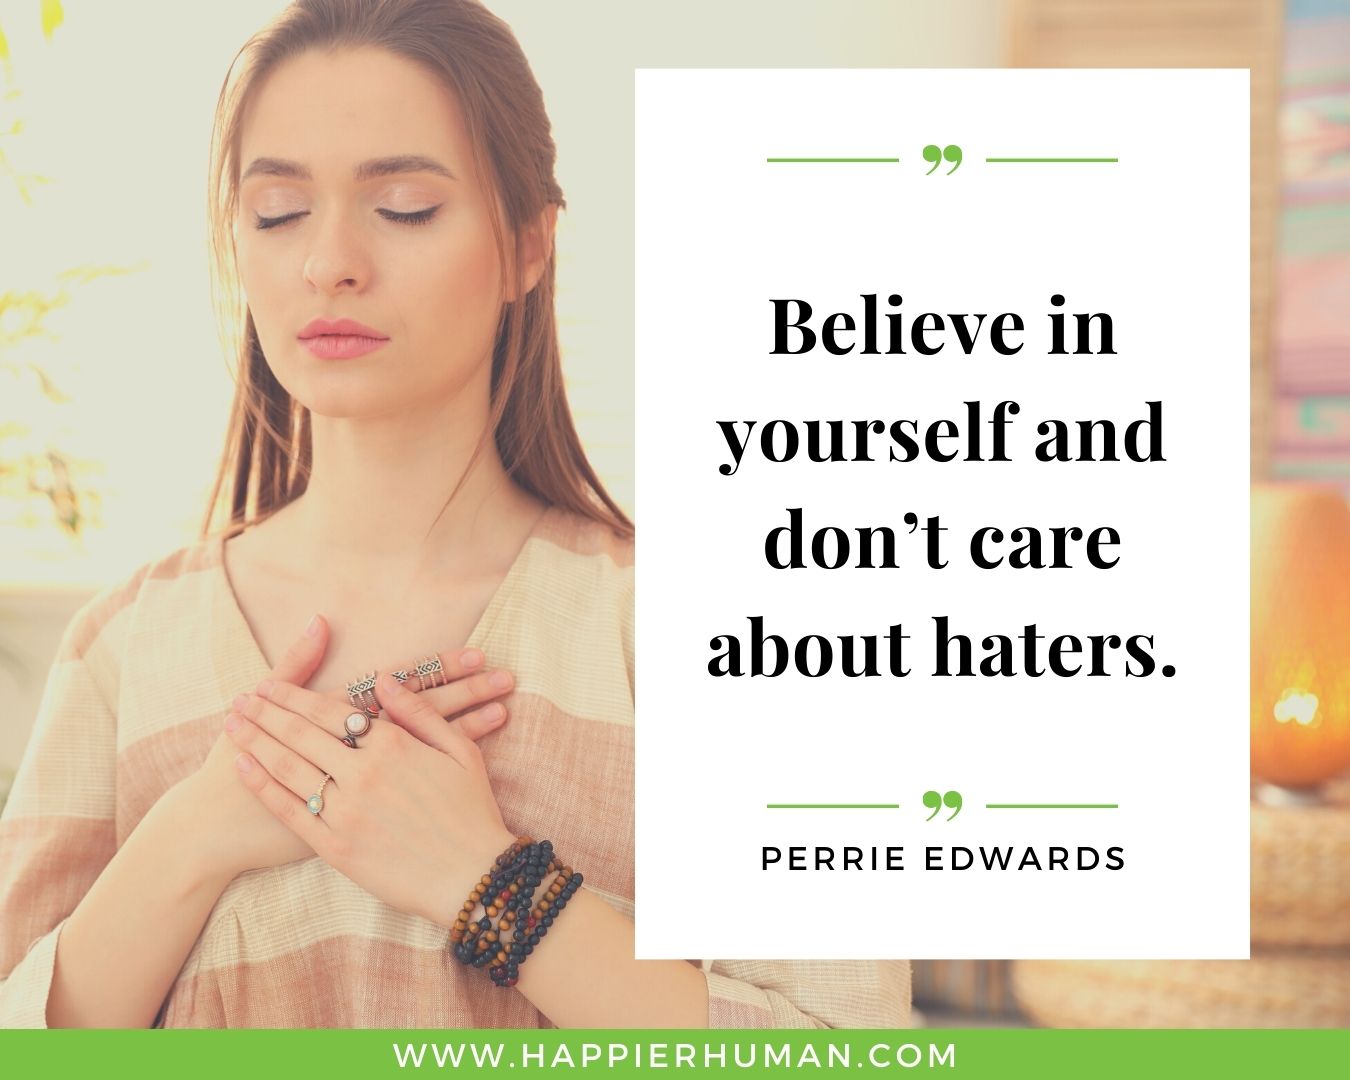 Haters Quotes - “Believe in yourself and don’t care about haters.” - Perrie Edwards